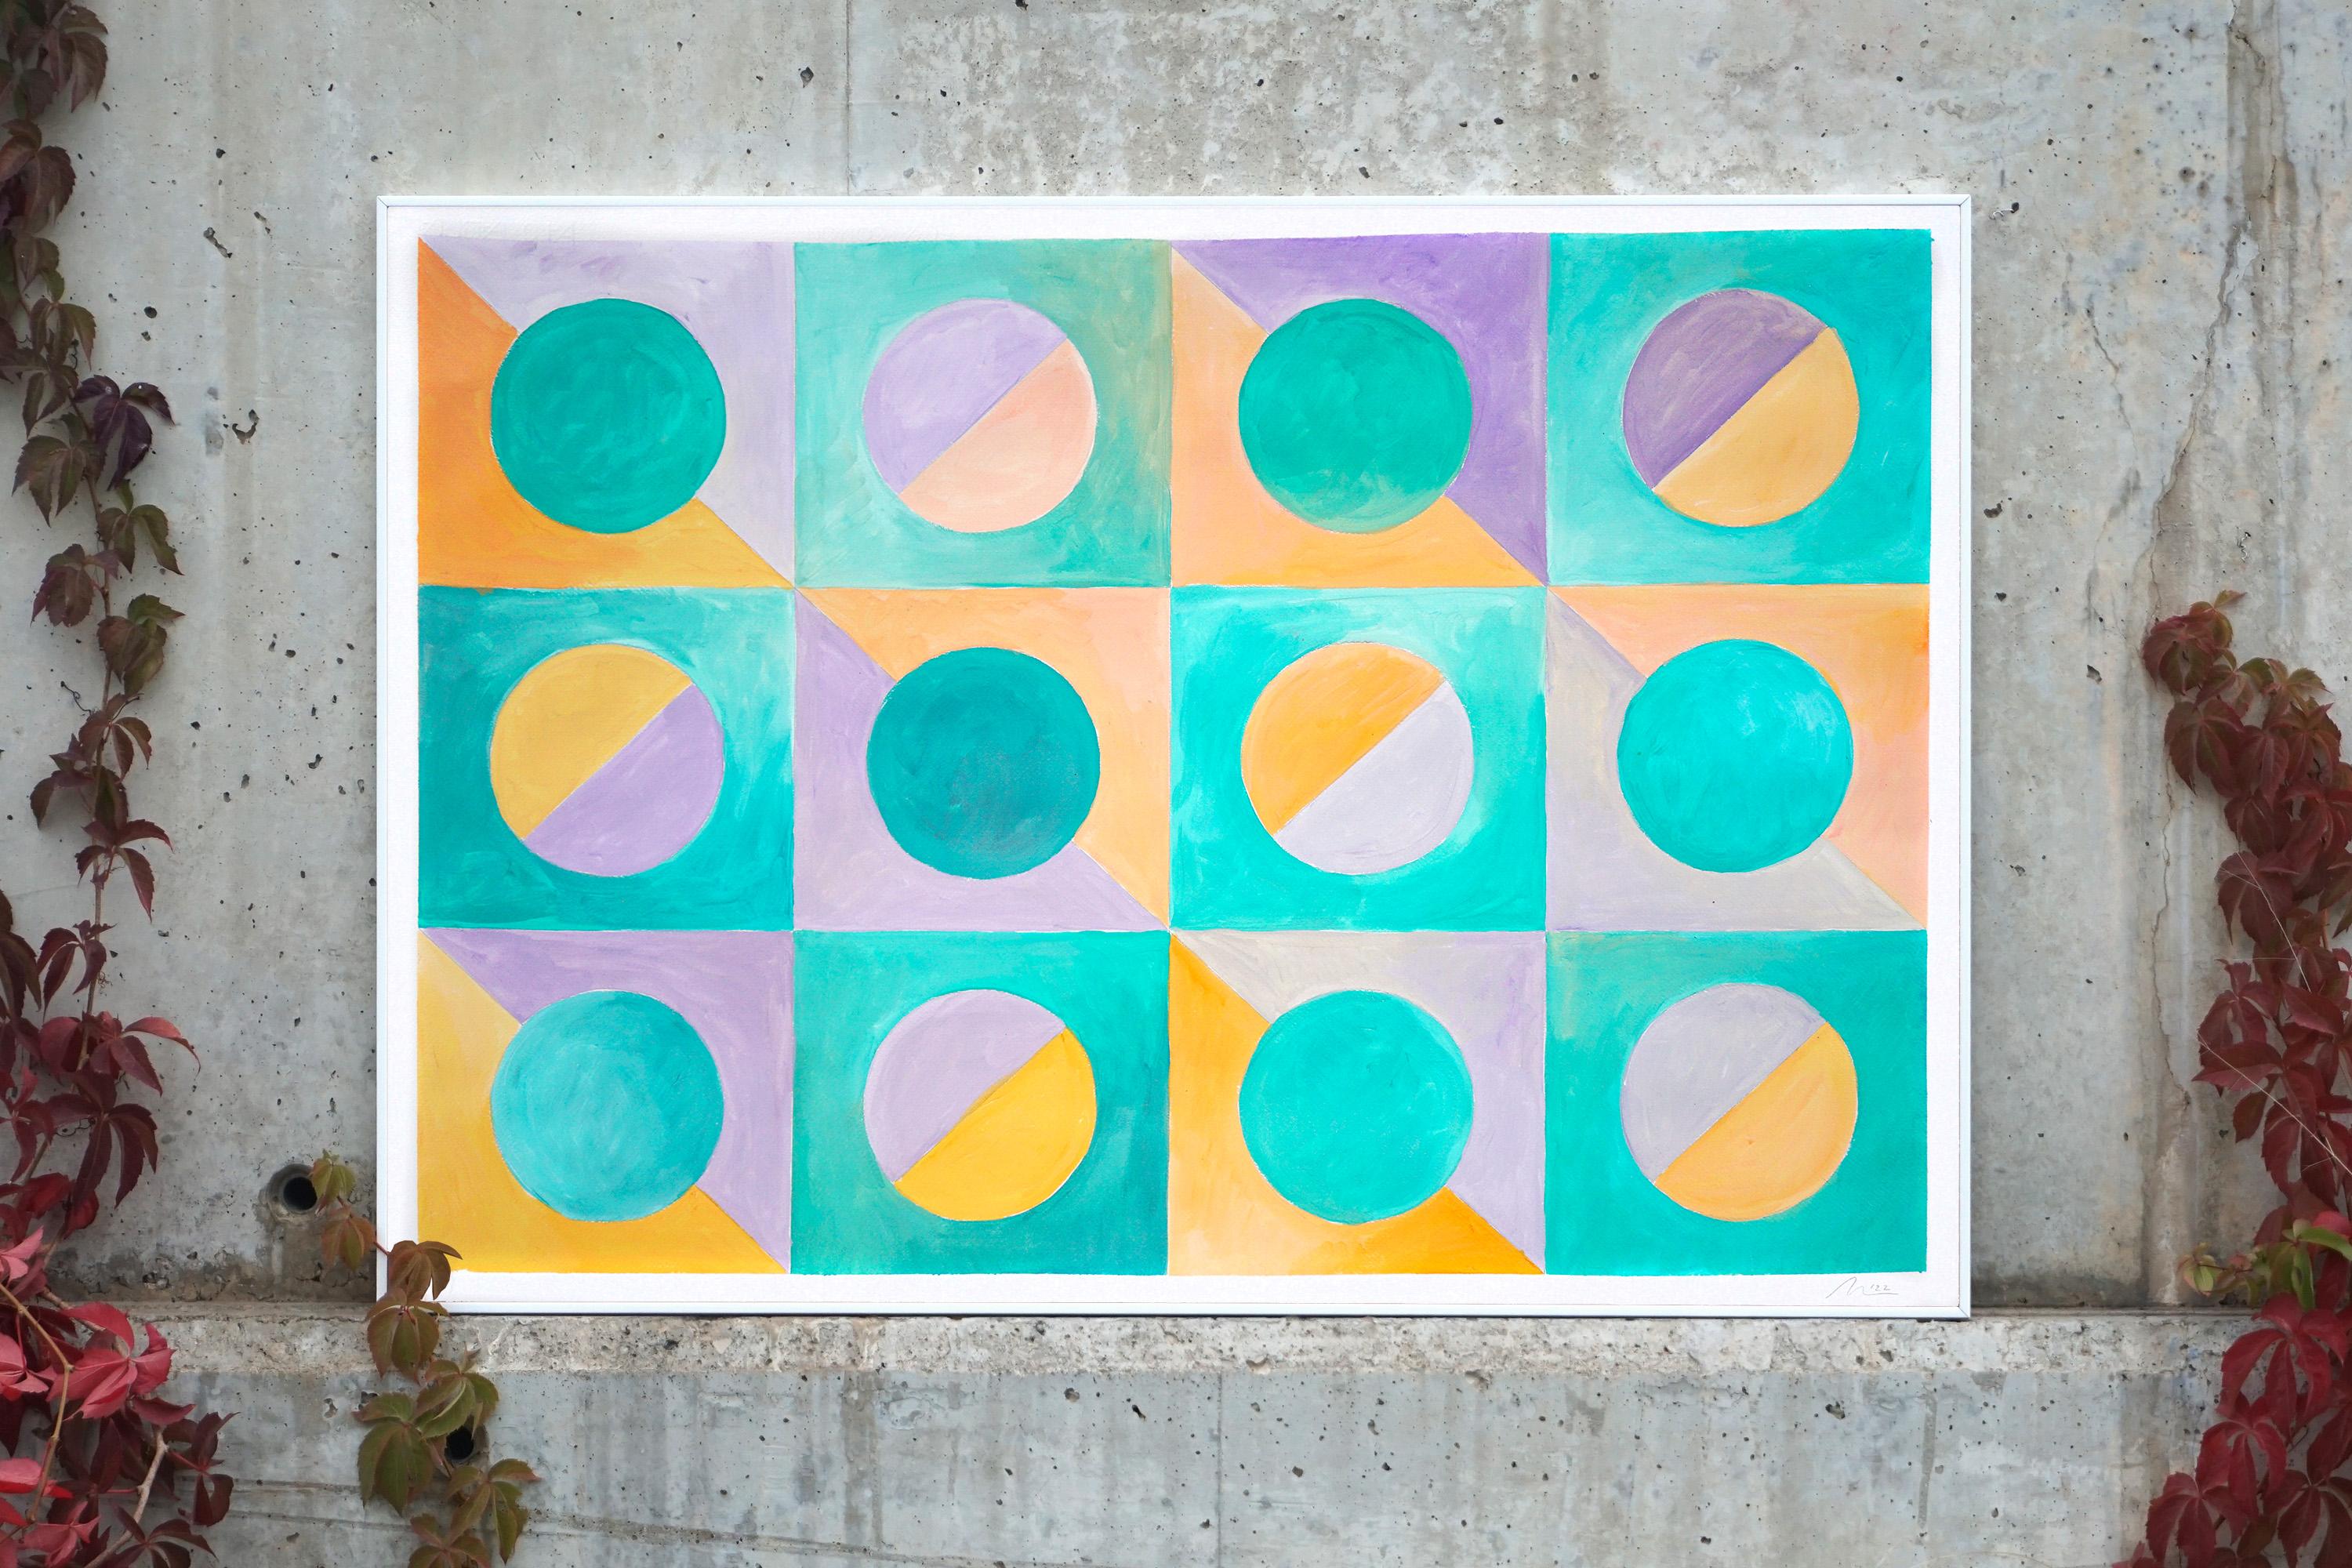 Pastel Tile Field, Turquoise & Yellow Patterns, Mauve Accents Geometry on Paper - Painting by Natalia Roman